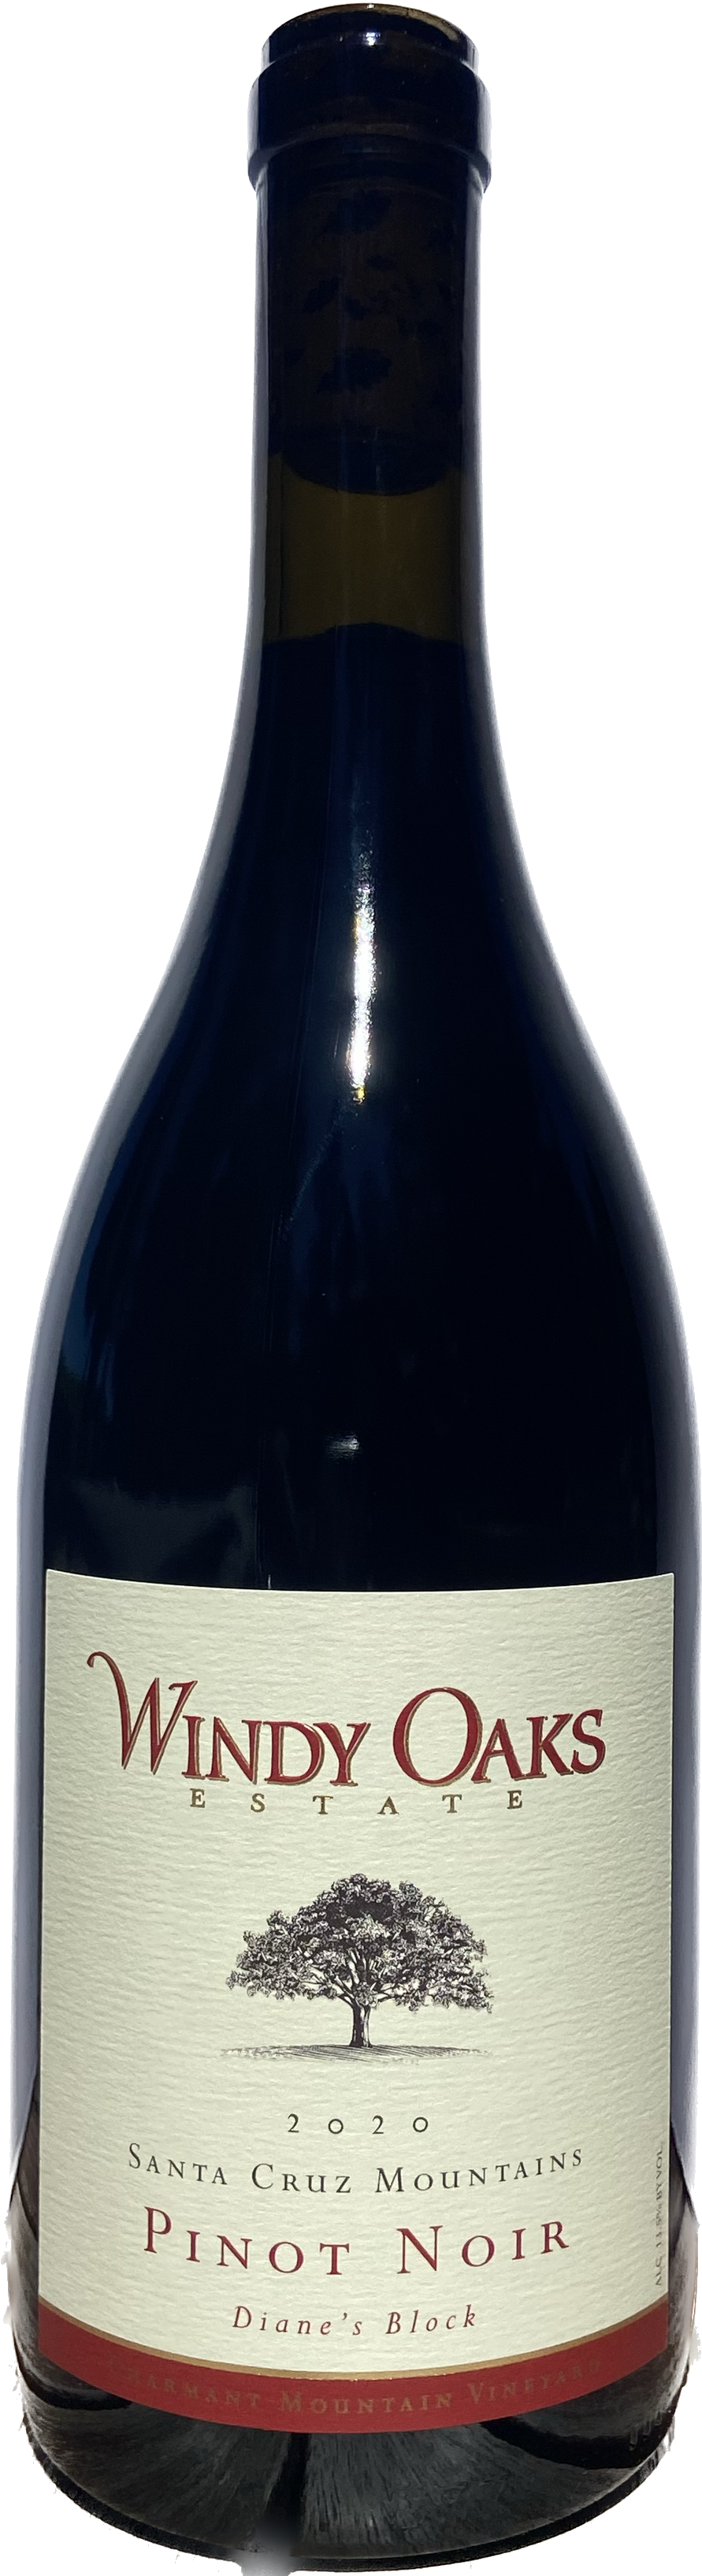 Product Image for 2020 Estate Pinot Noir, Diane's Block